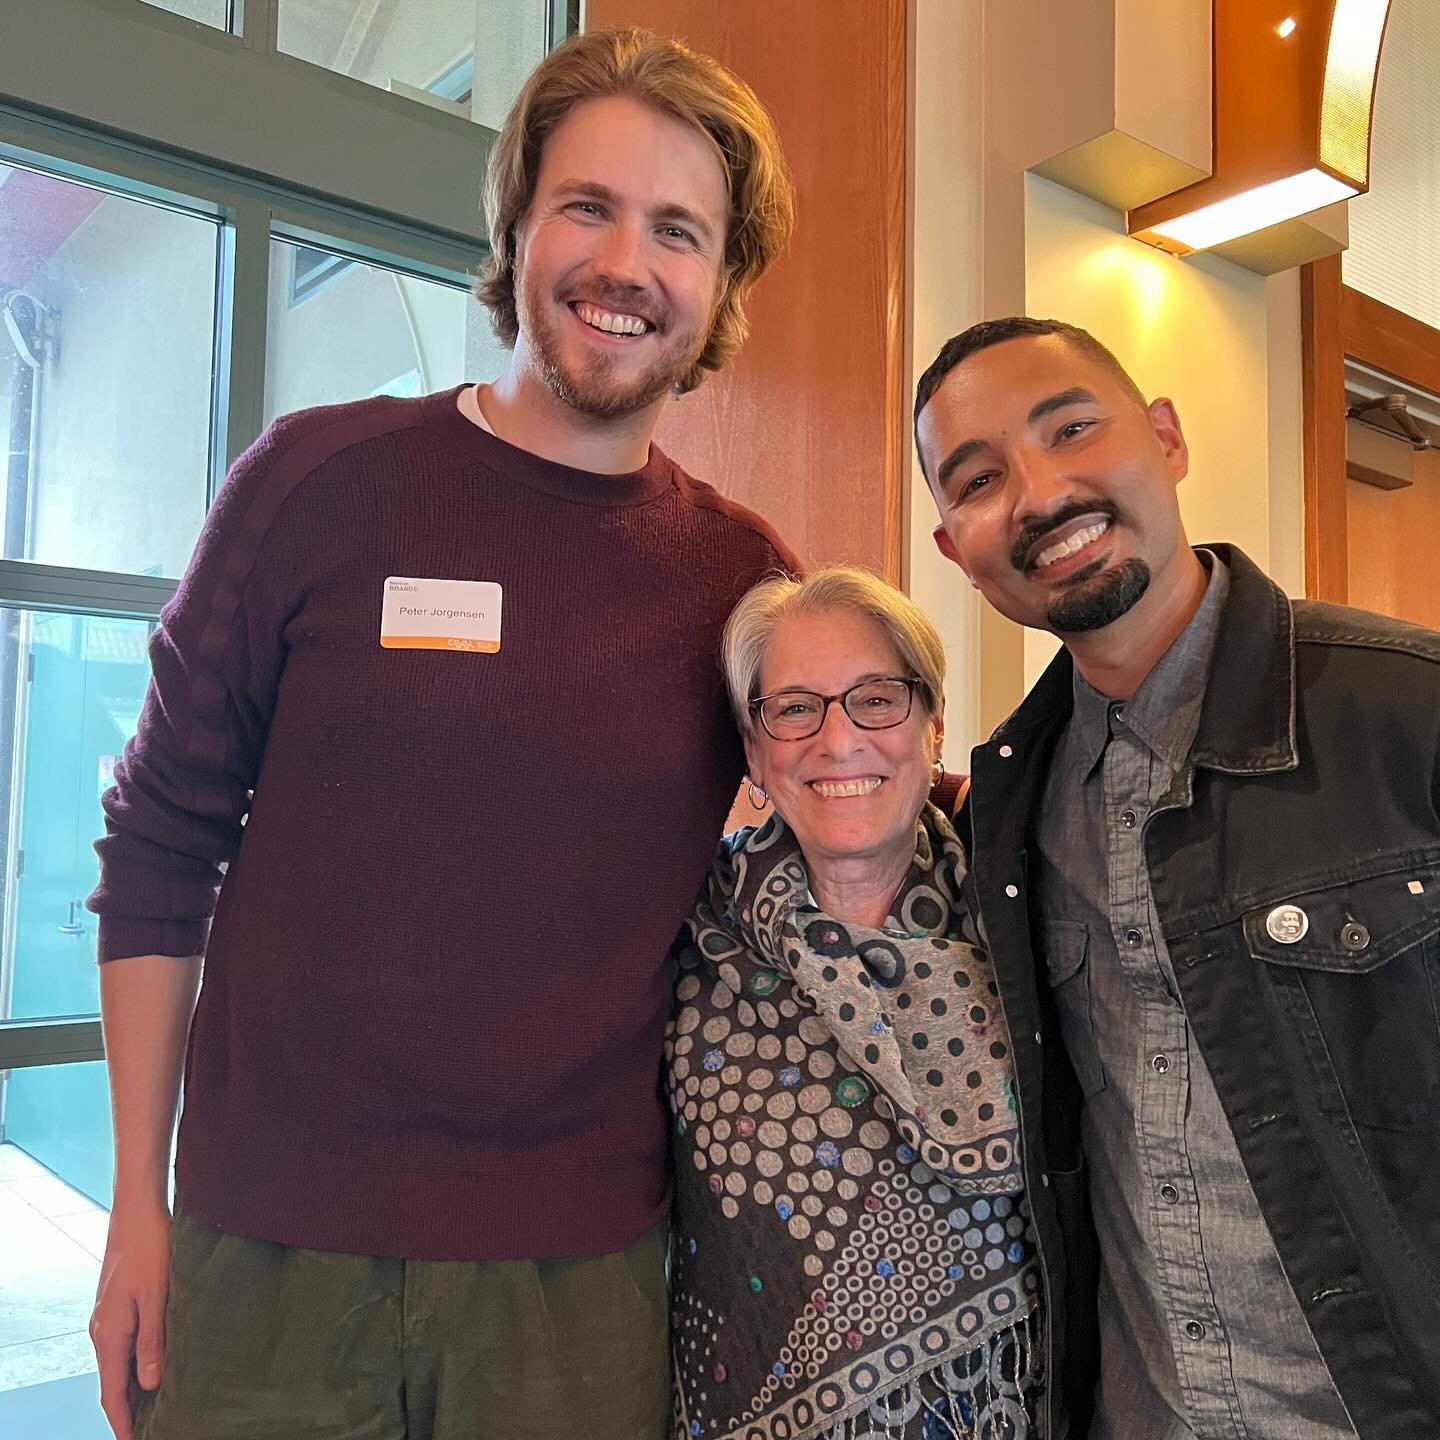 This last year, the Performing Arts Workshop Board of Directors was excited to collaborate with Center for Social Sector Leadership at the Haas School of Business at UC Berkeley to house two incredible graduate student fellows through their Bears on 